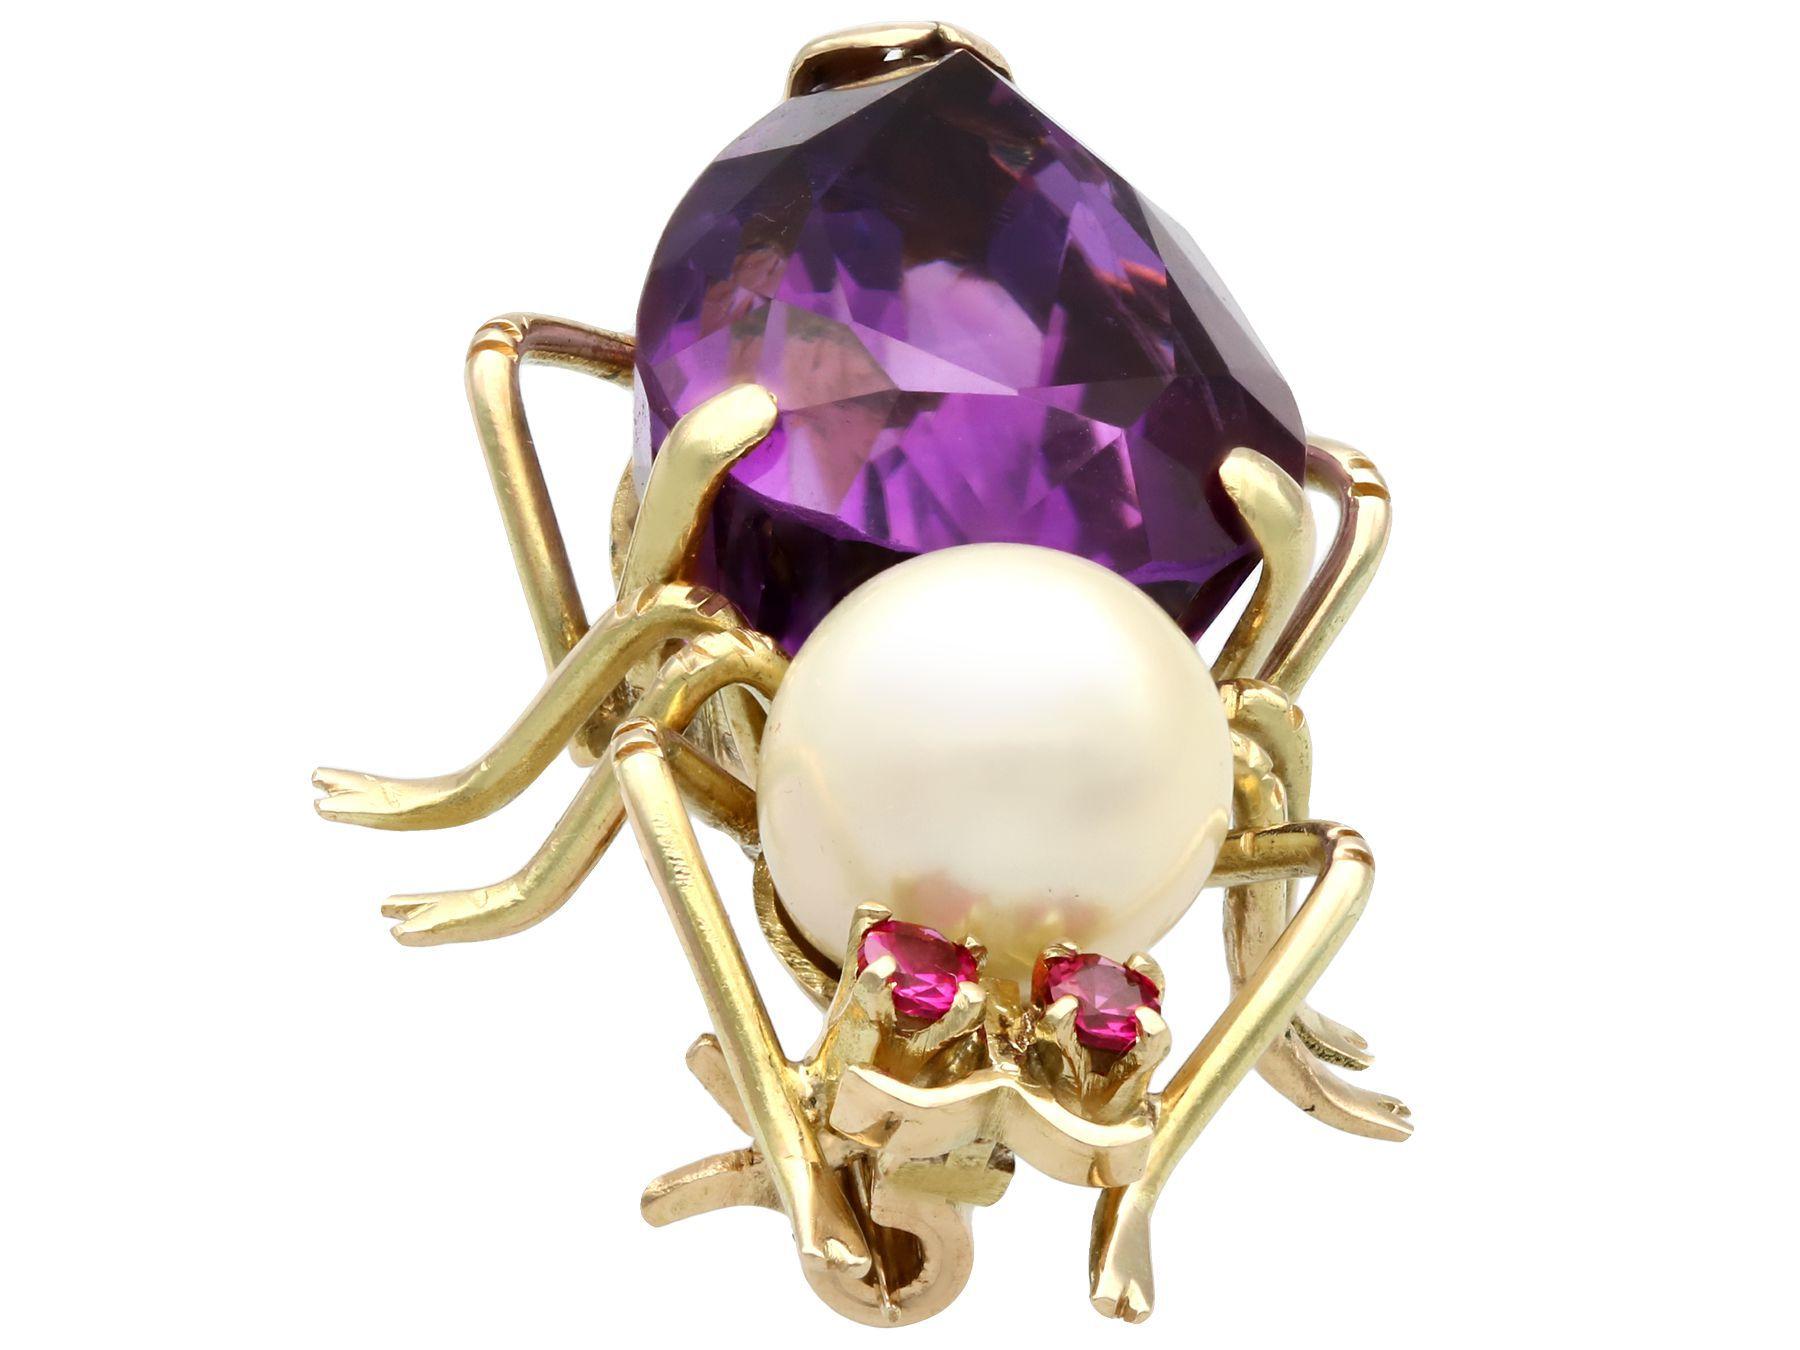 A fine and impressive 12.39 carat amethyst, pearl and 0.06 carat ruby, 14 karat yellow gold 'insect' brooch; part of our diverse vintage jewelry and estate jewelry collections

This fine and impressive vintage amethyst brooch has been crafted in 14k